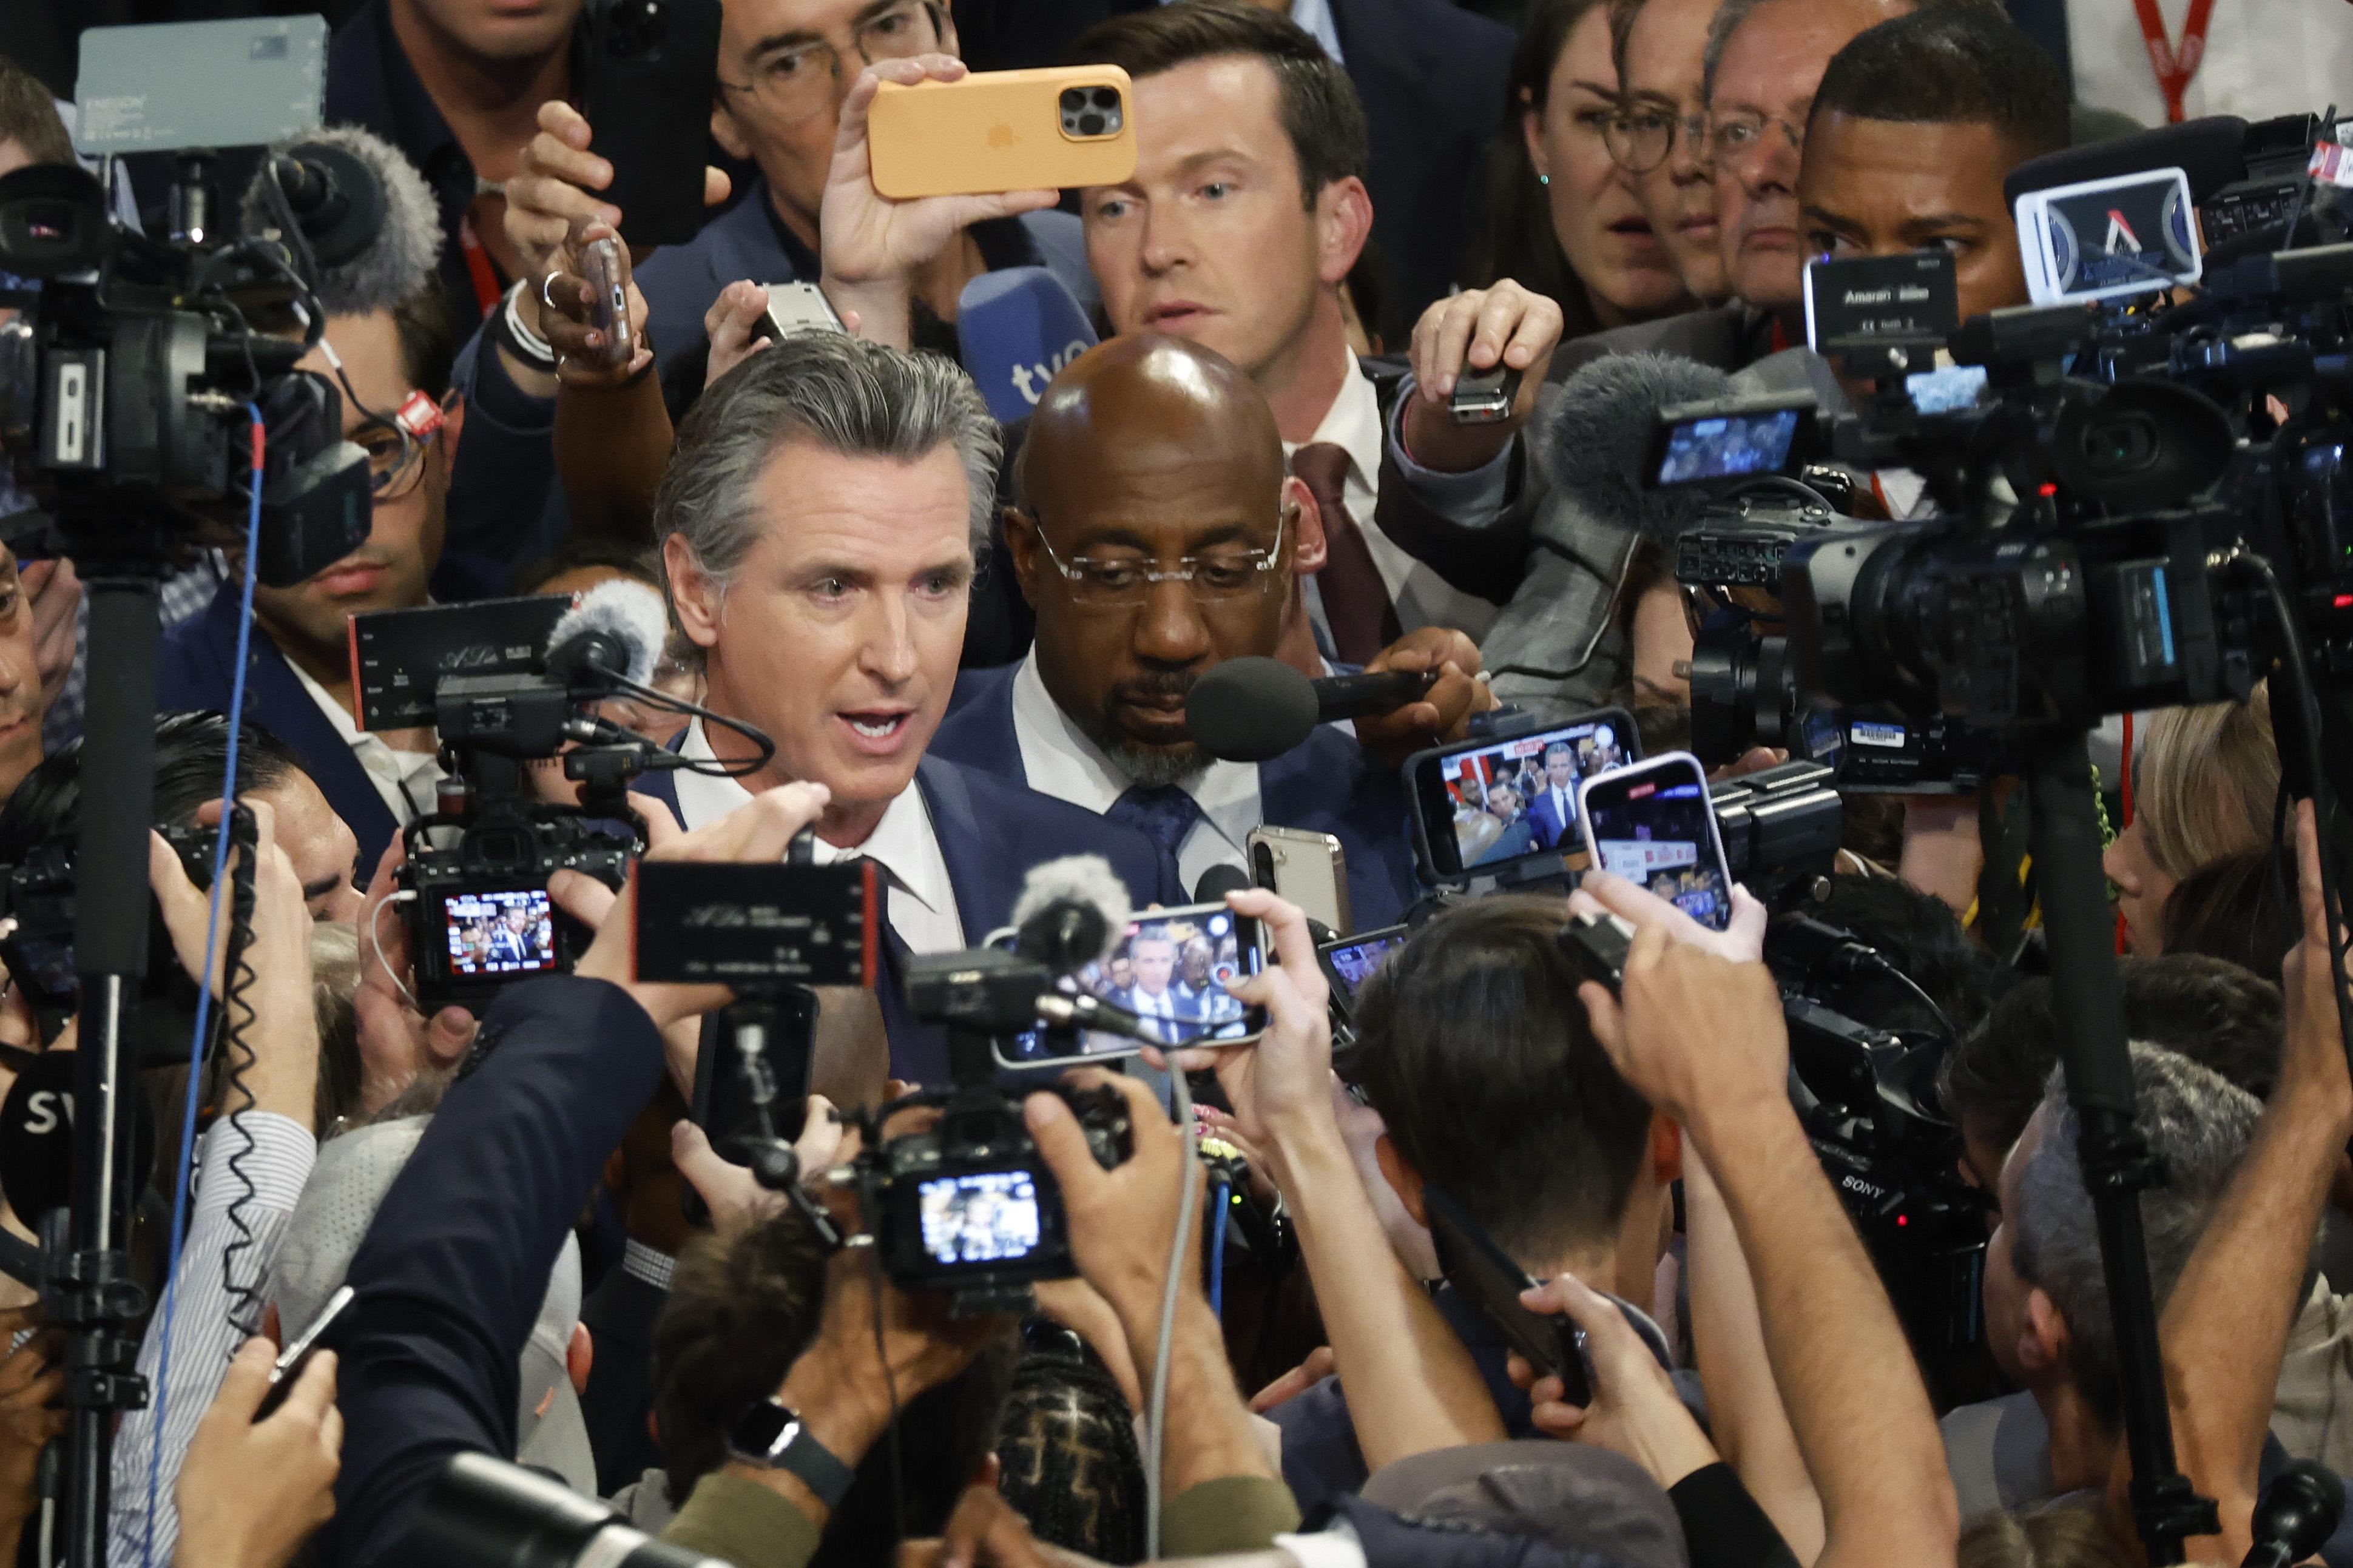 Two men speak to a swarm of reporters.